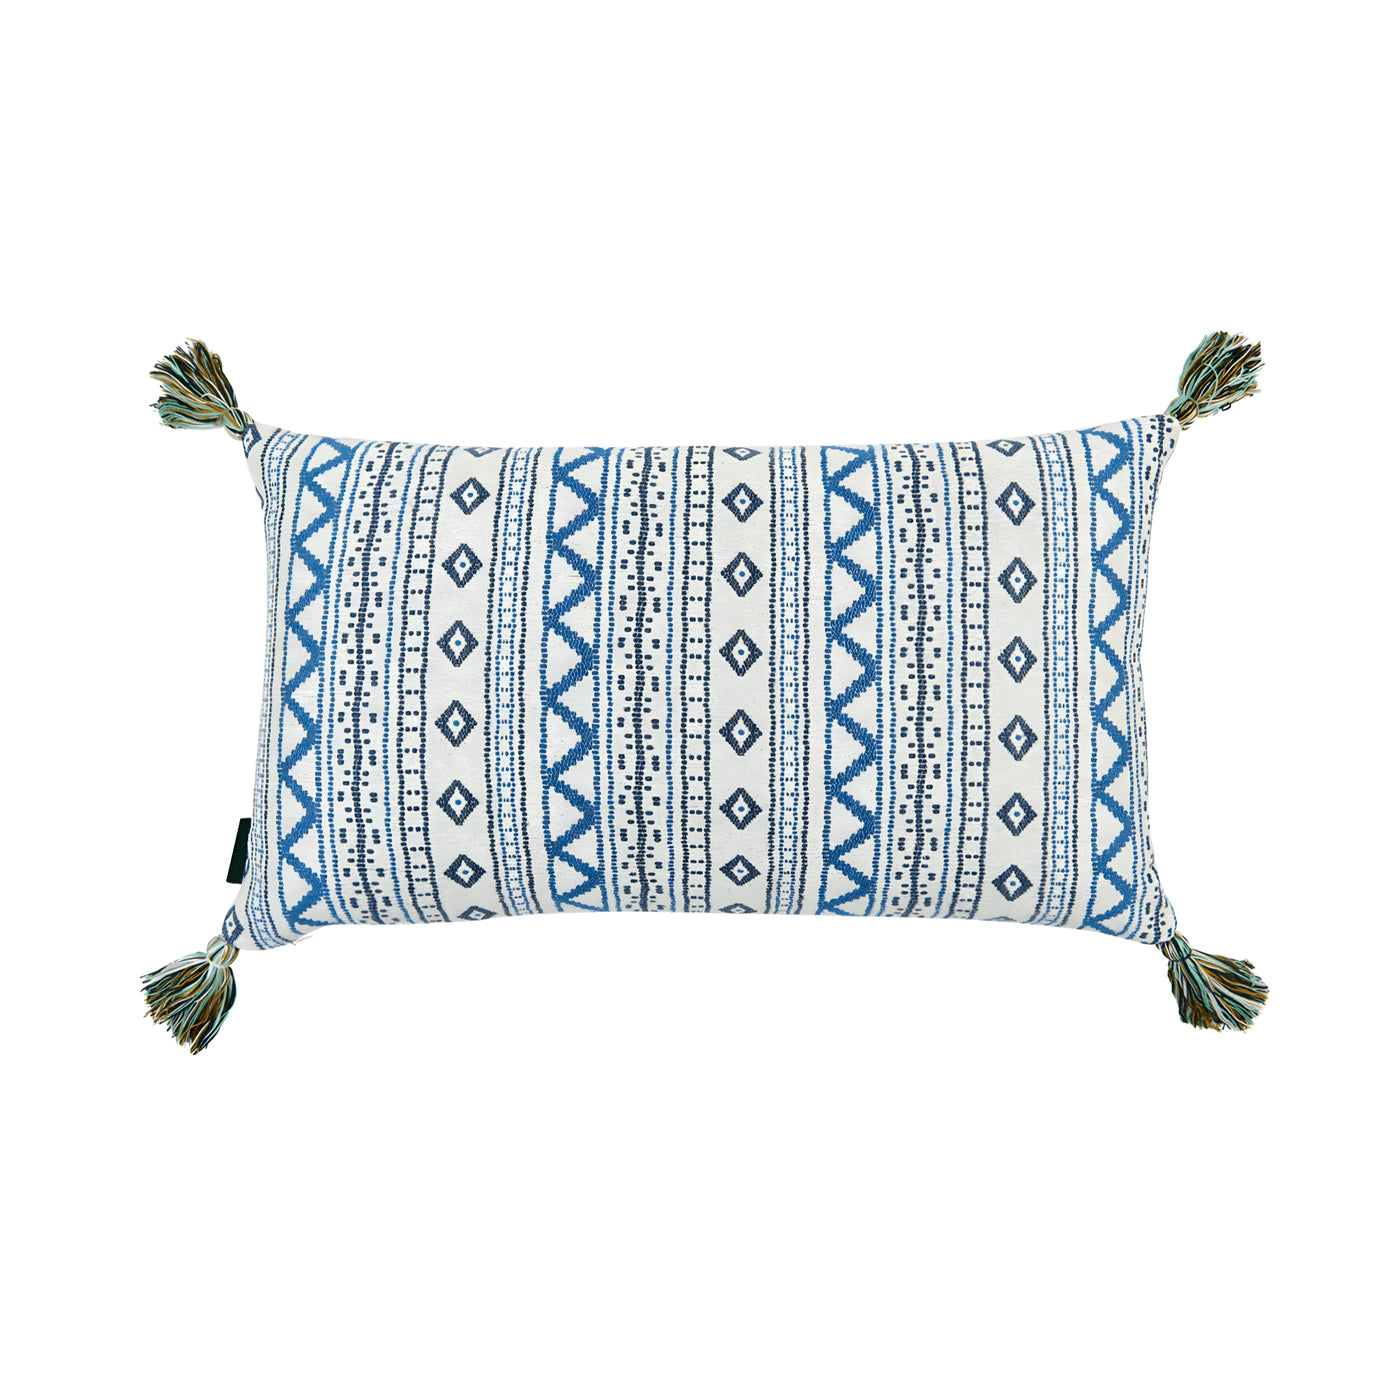 Penny Morrison Pillow with Blue and Green Tassels